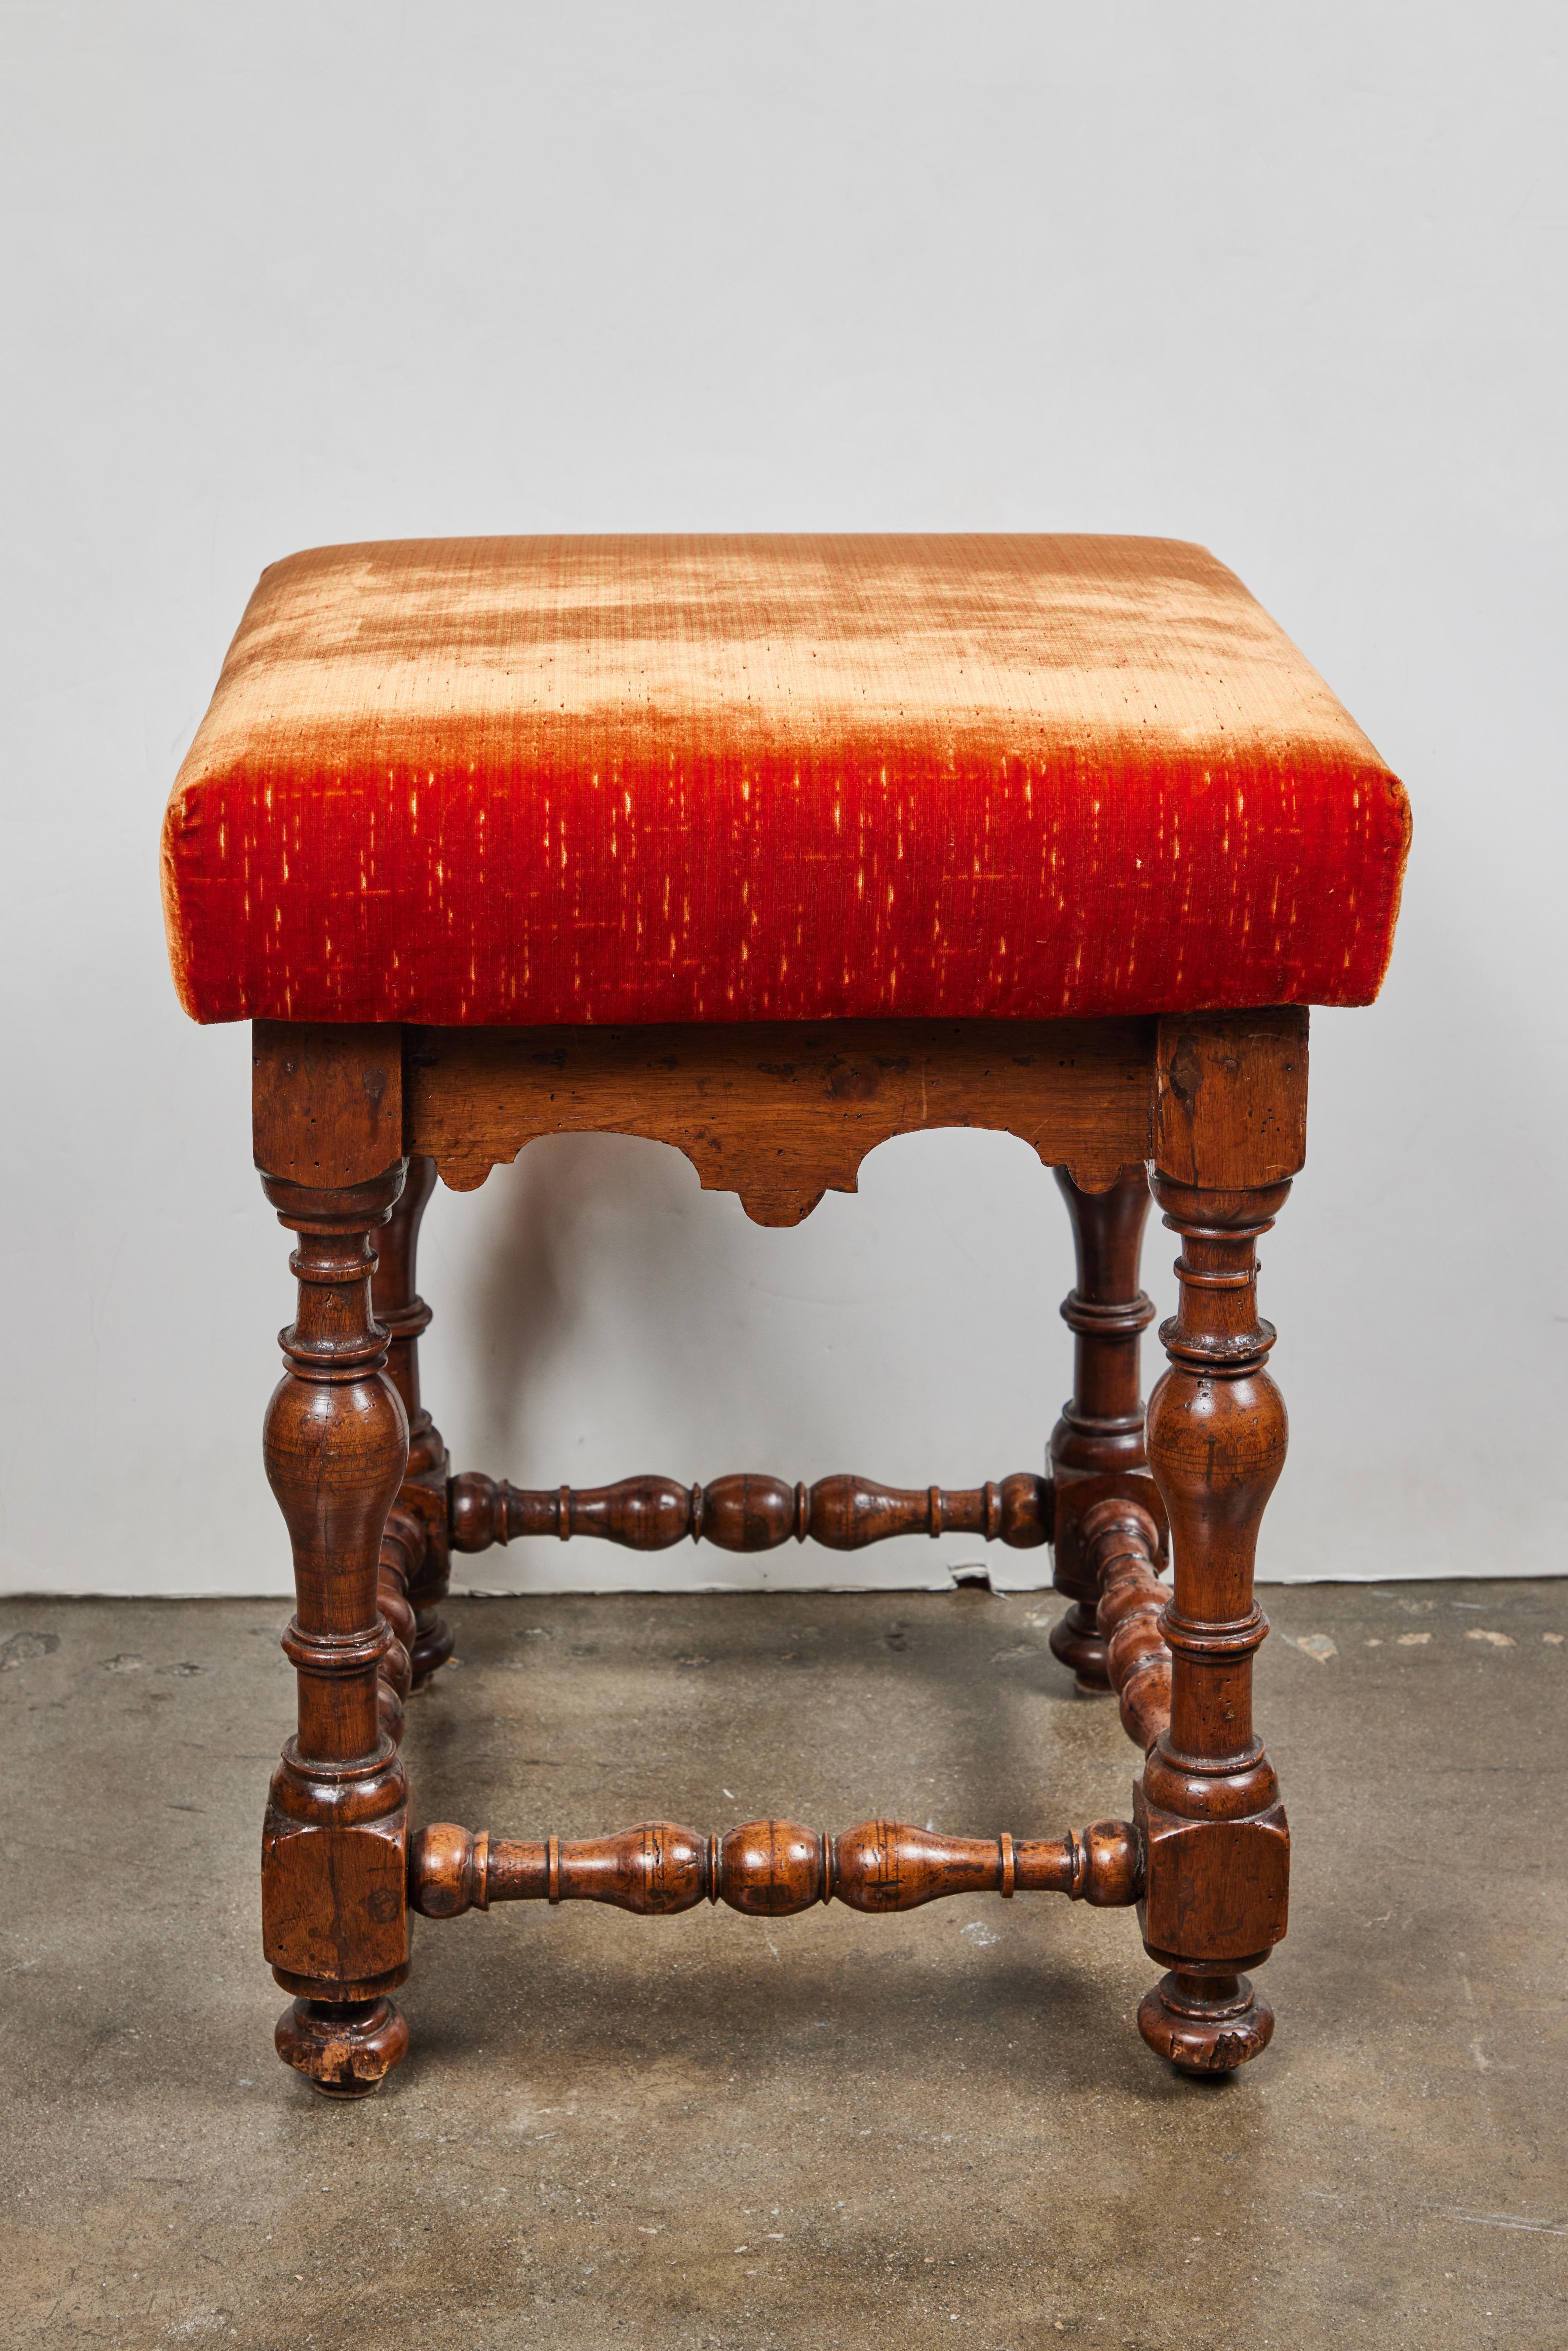 A fine pair of hand-carved, solid walnut, 18th century Tuscan stools. Each with serpentine aprons and standing on turned legs and stretchers. Covered in luxurious, burnt sienna, Scalamandre silk velvet.